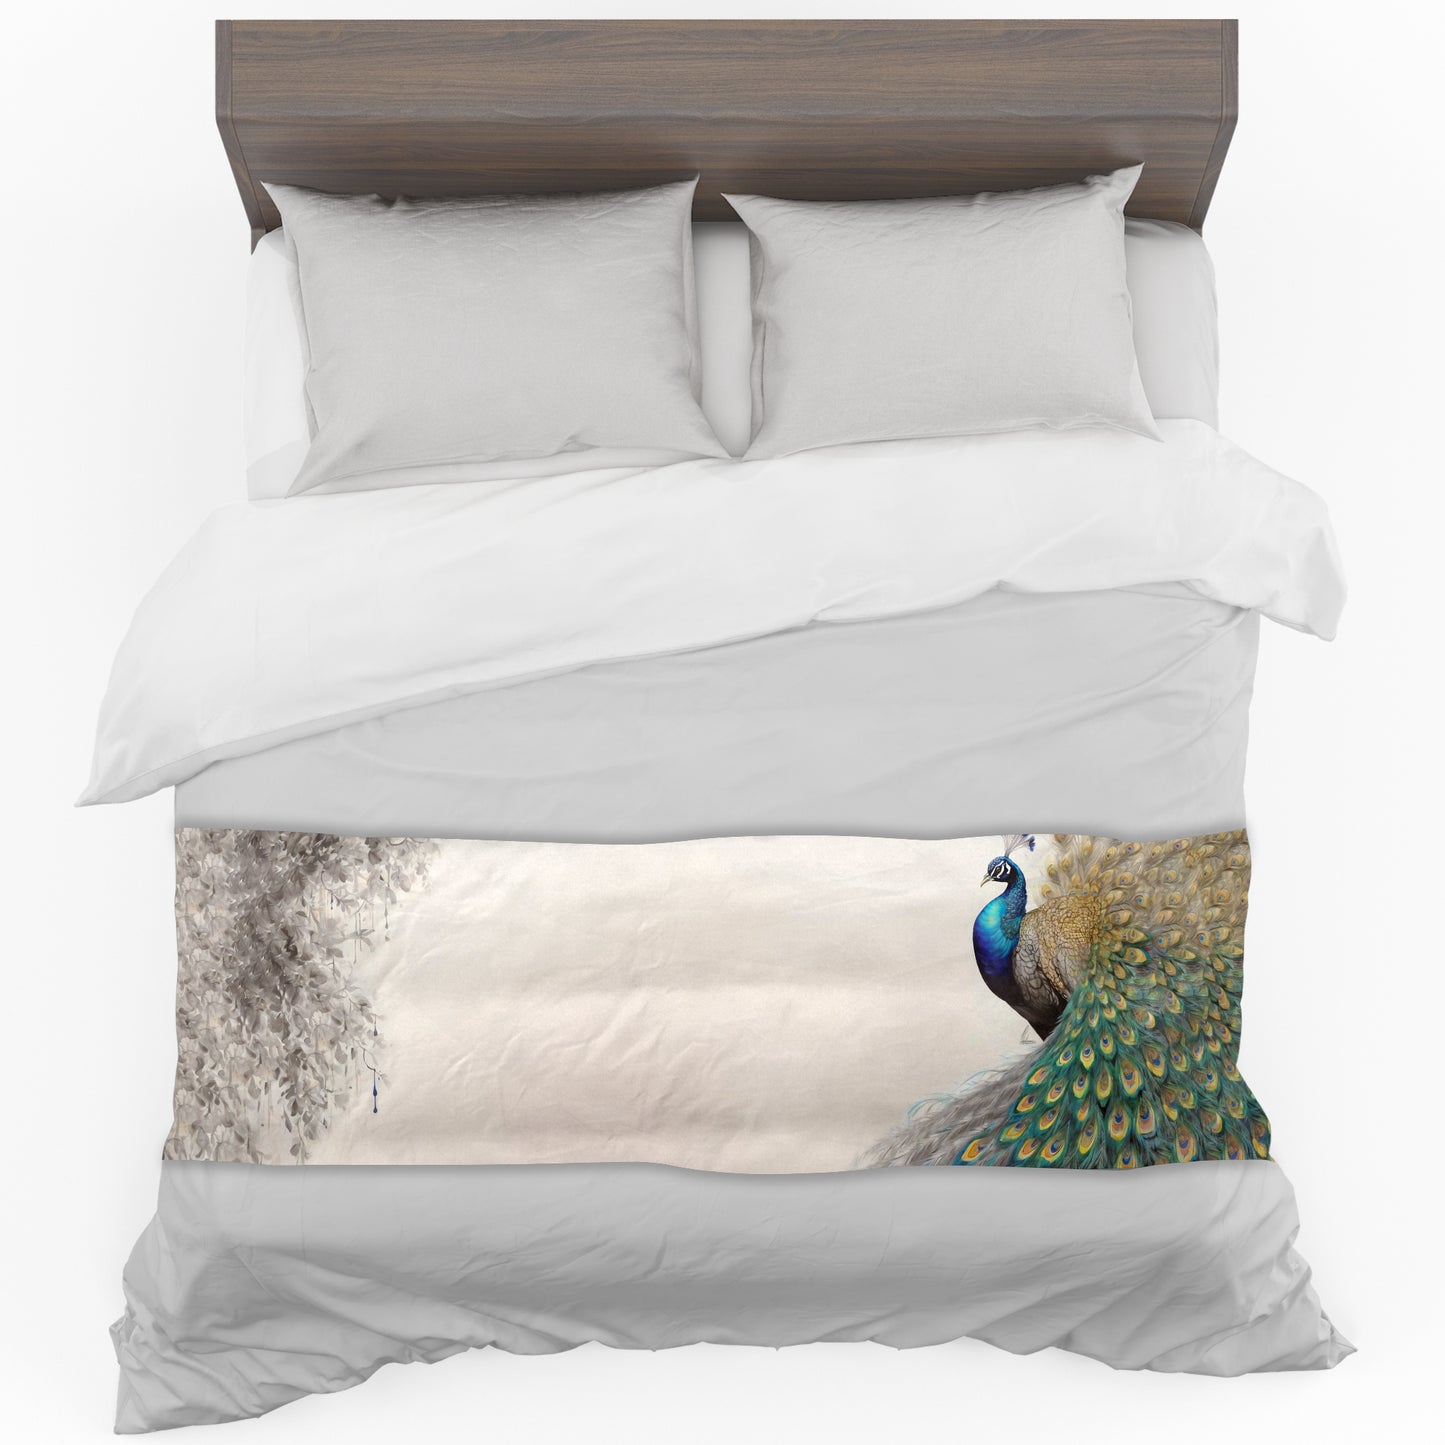 Peacock's Eclipsed Plumage By Nathan Pieterse Bed Runner and Optional Pillowcases